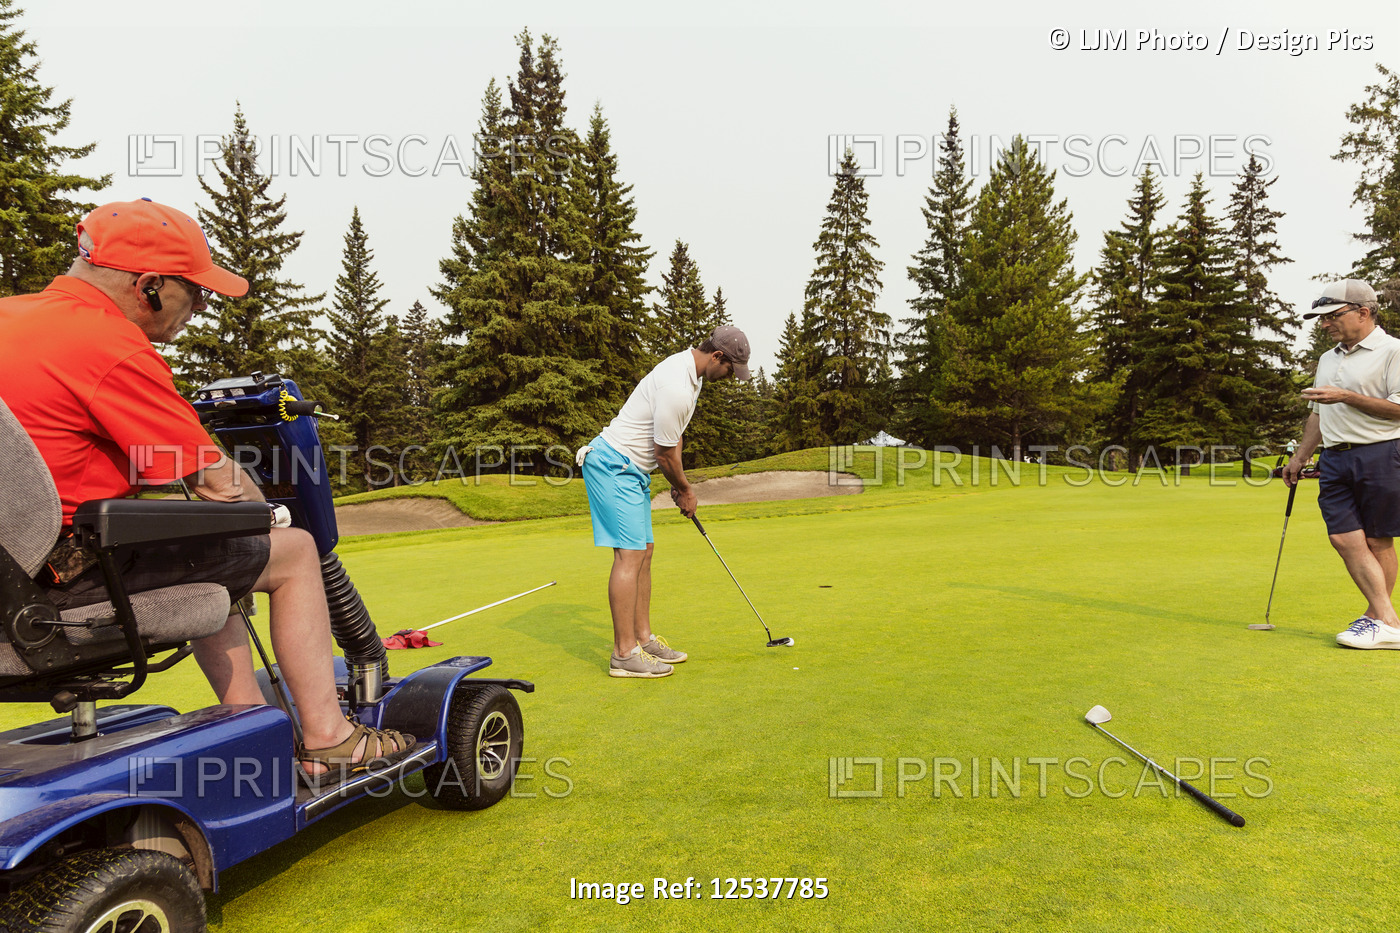 Two able bodied golfers team up with a disabled golfer using a specialized ...